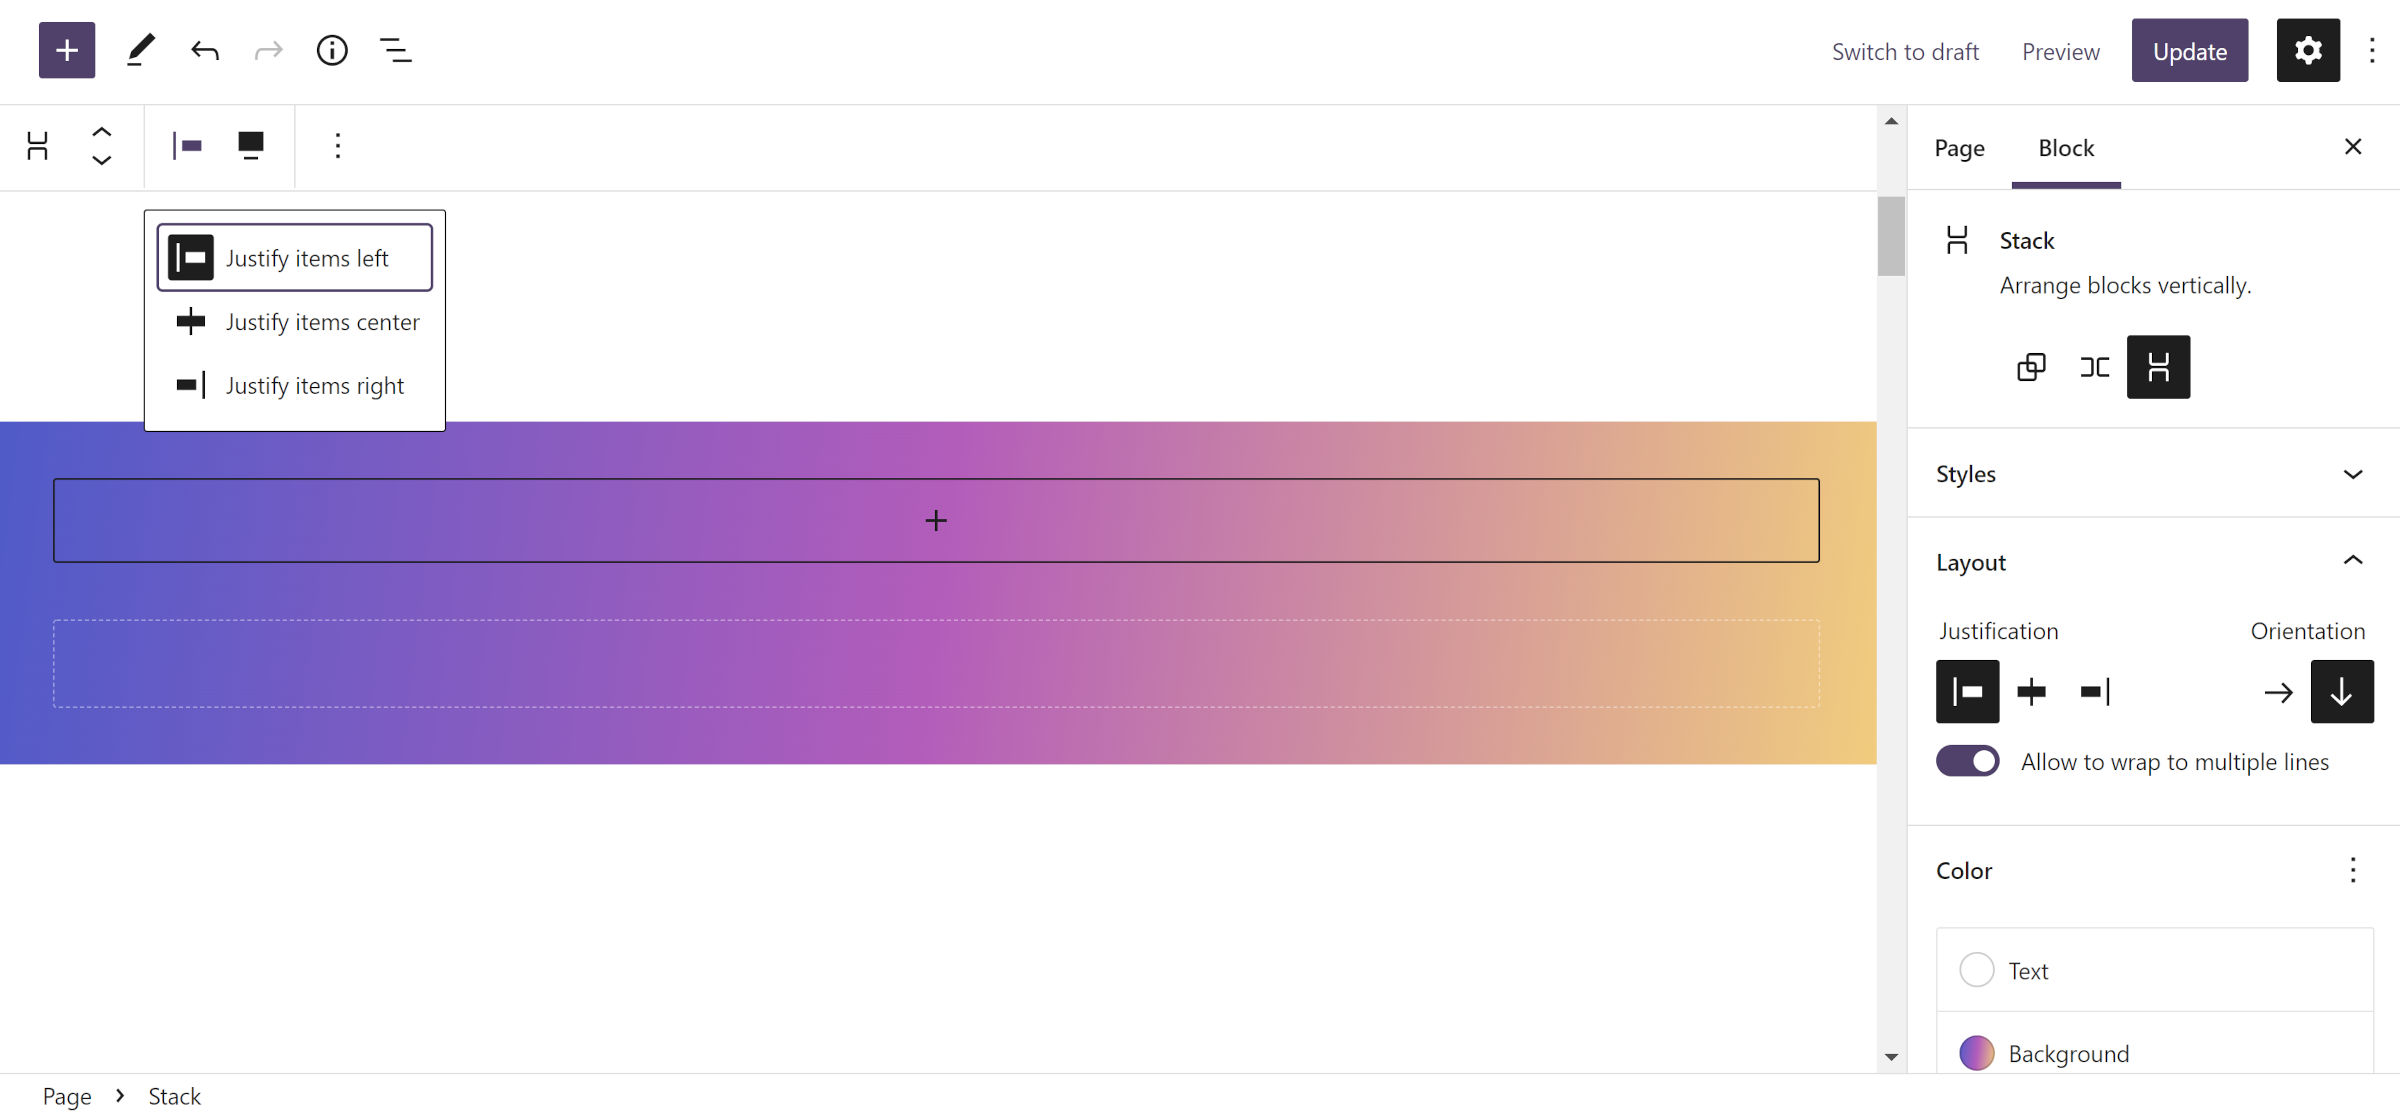 WordPress post editor with a Stack block inserted that has a colorful gradient background.  The content justification toolbar control is selected with the items justified left.